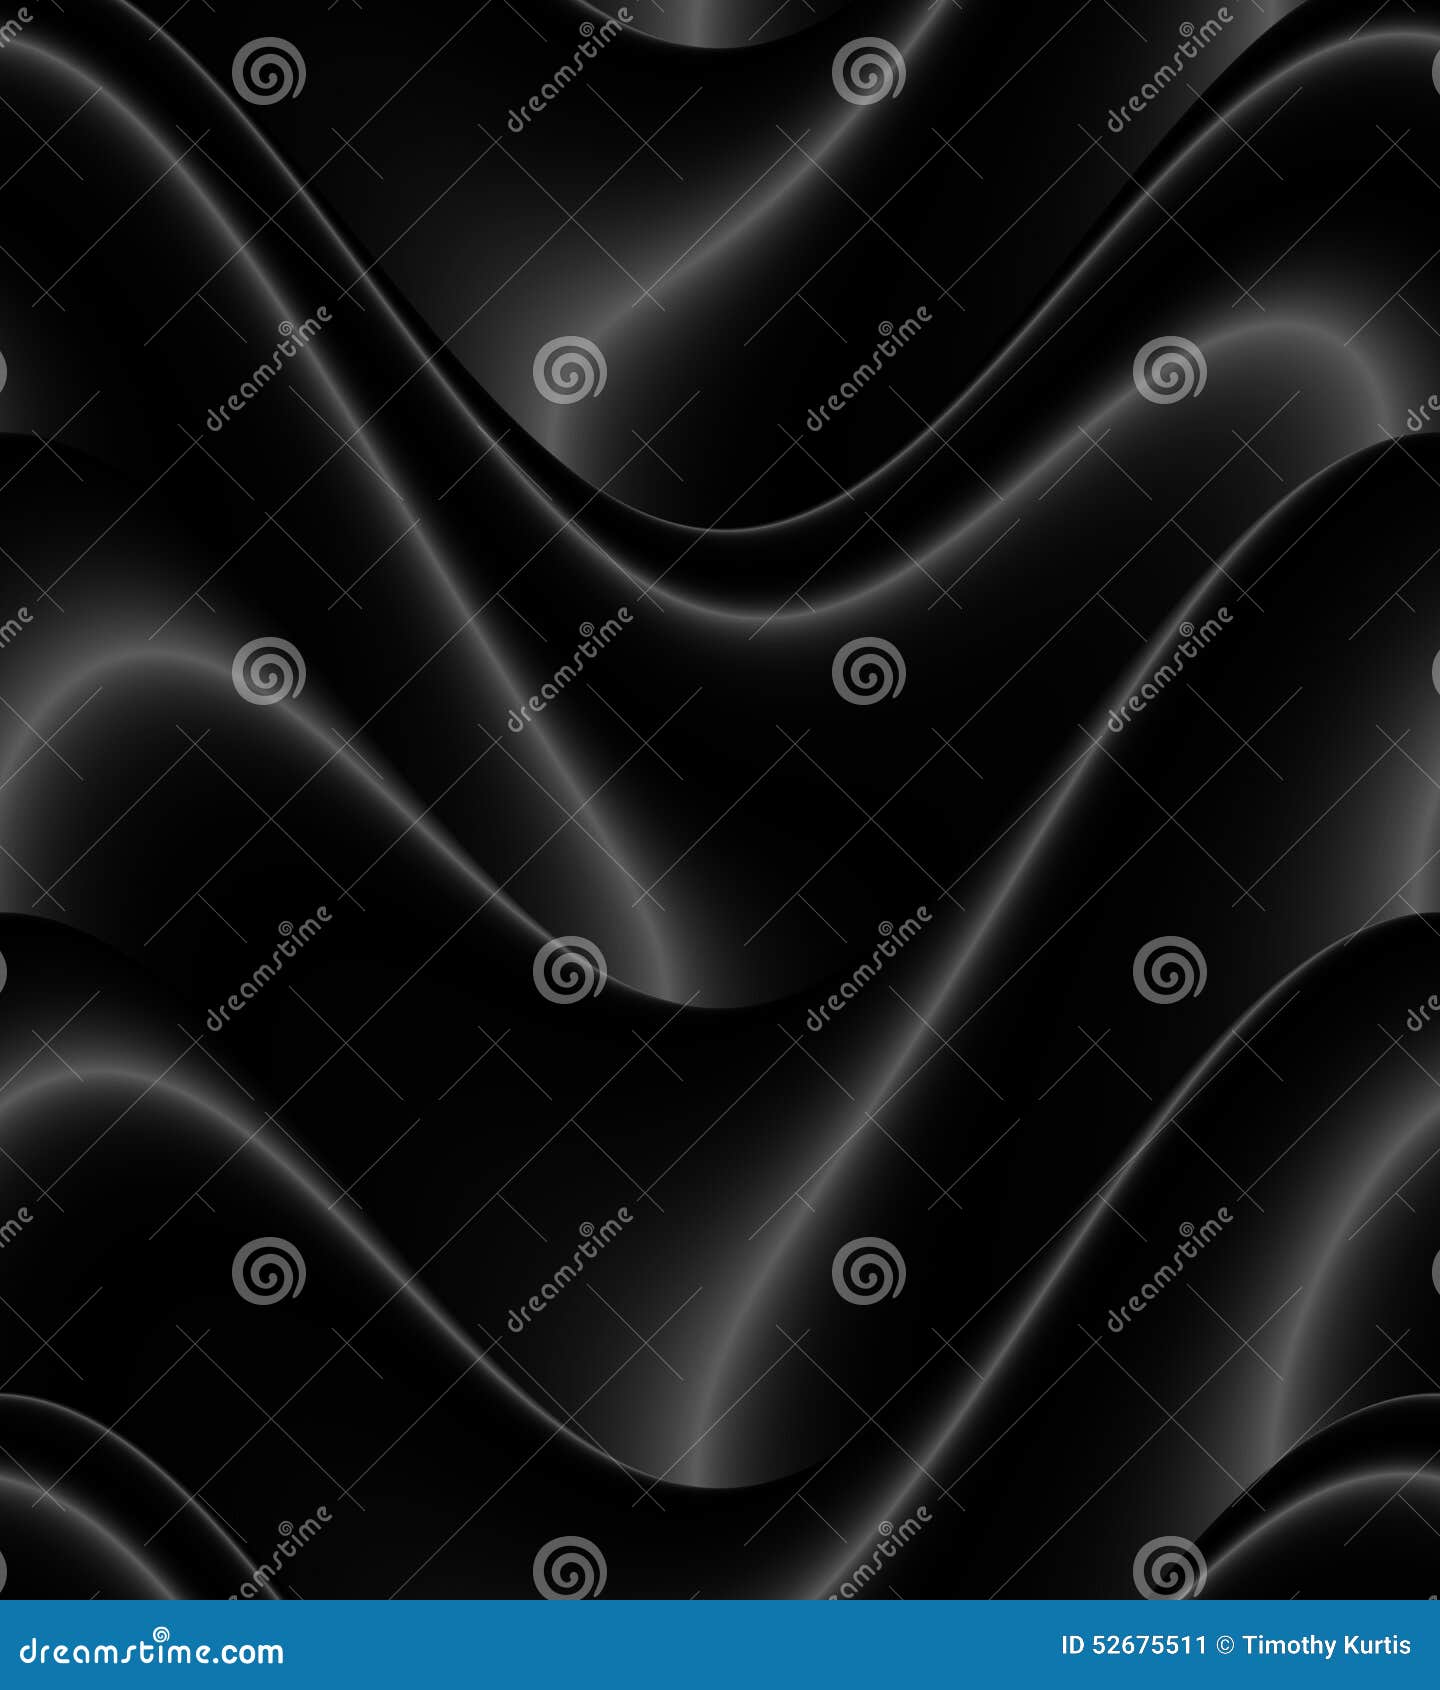  Unique  Black  And White  Pattern For Background Wallpaper  